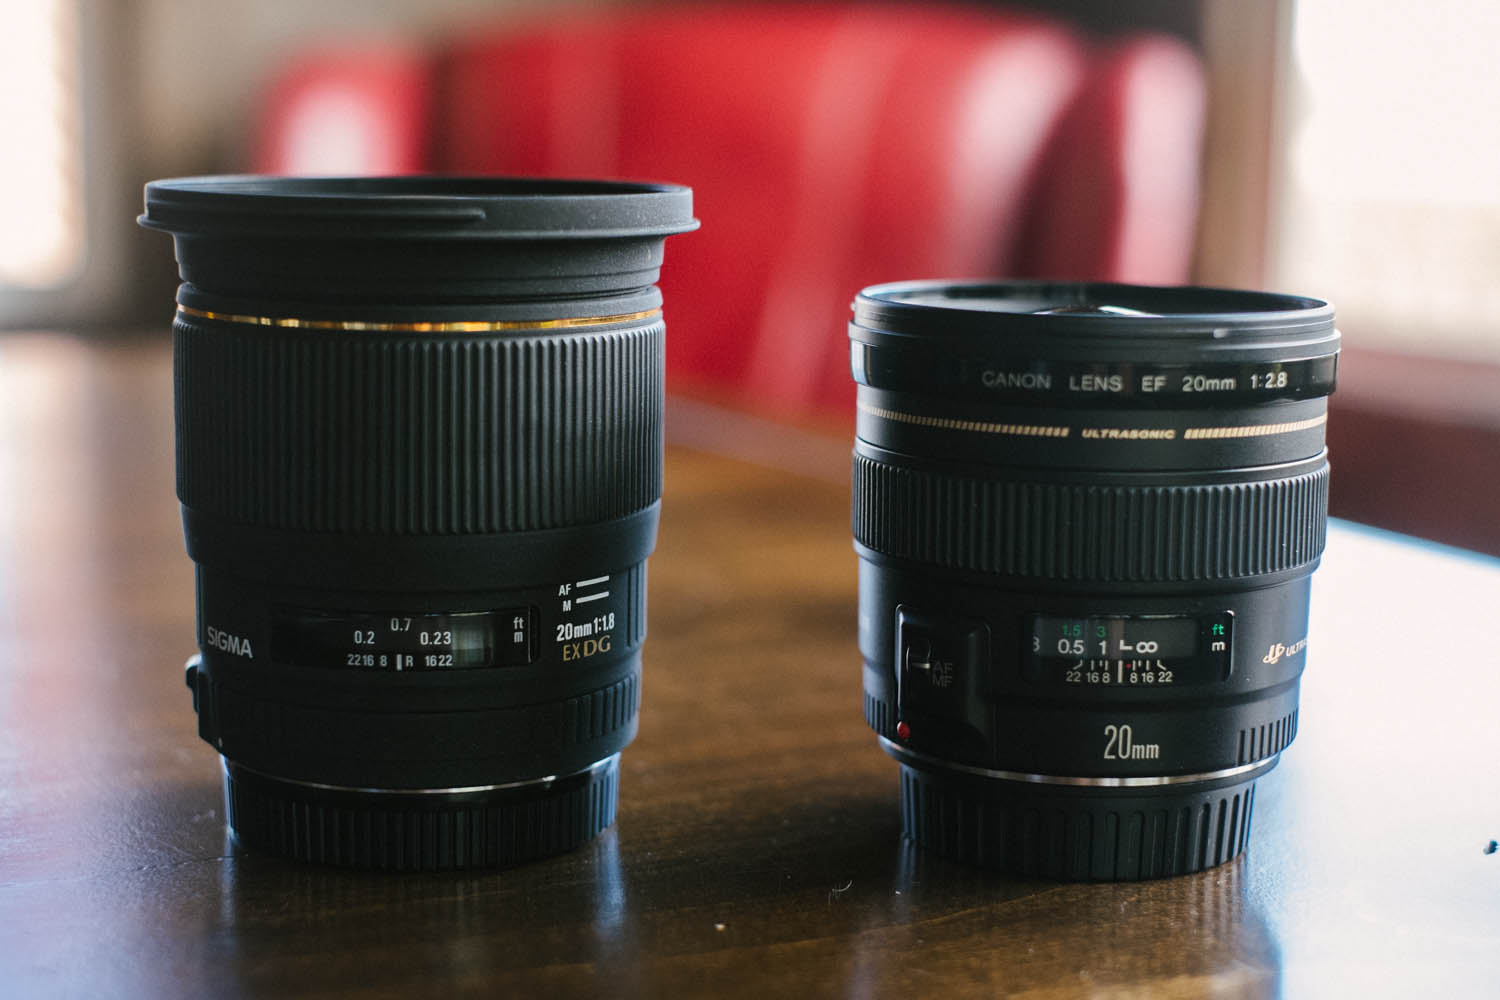 Review: Sigma 20mm f1.8 EX DG RF Aspherical - The Phoblographer